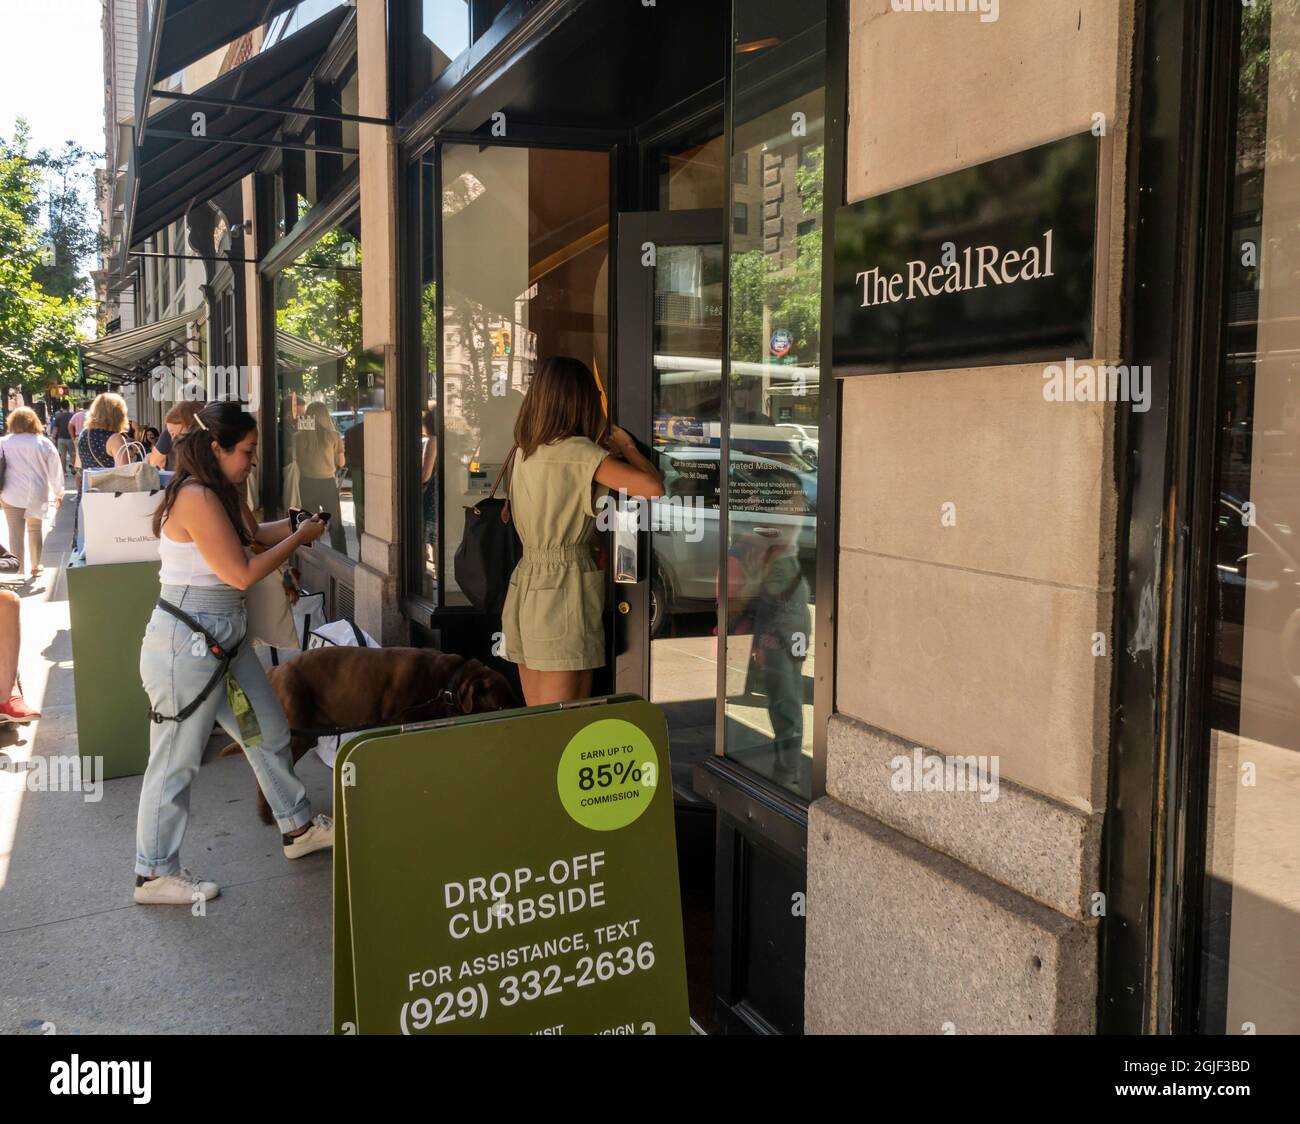 Customers  enter The RealReal luxury consignment store in the Upper east Side neighborhood of New York on  Saturday, September 4, 2021. The estimate for the total luxury resale market in the U.S. is $6 billion. (© Richard B. Levine) Stock Photo